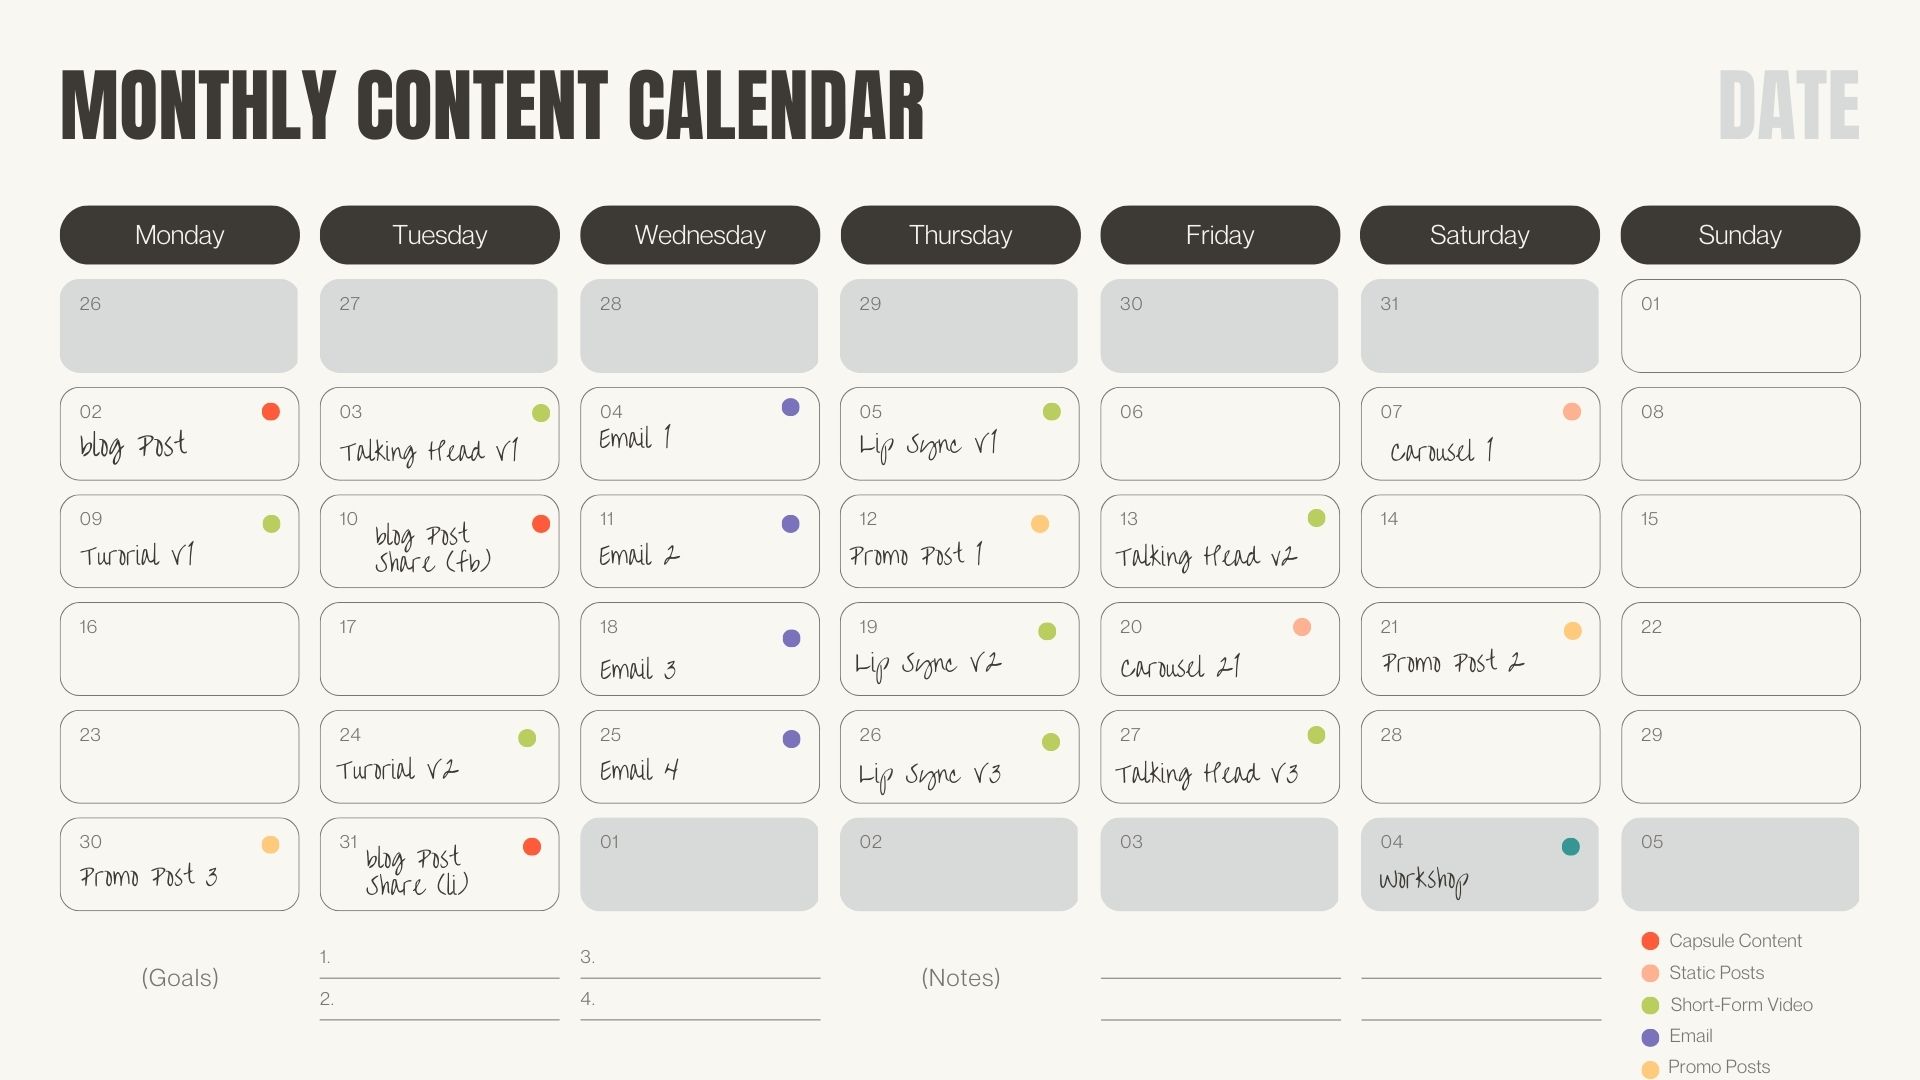 Sample Capsule Content Calendar for the minimalist content strategy